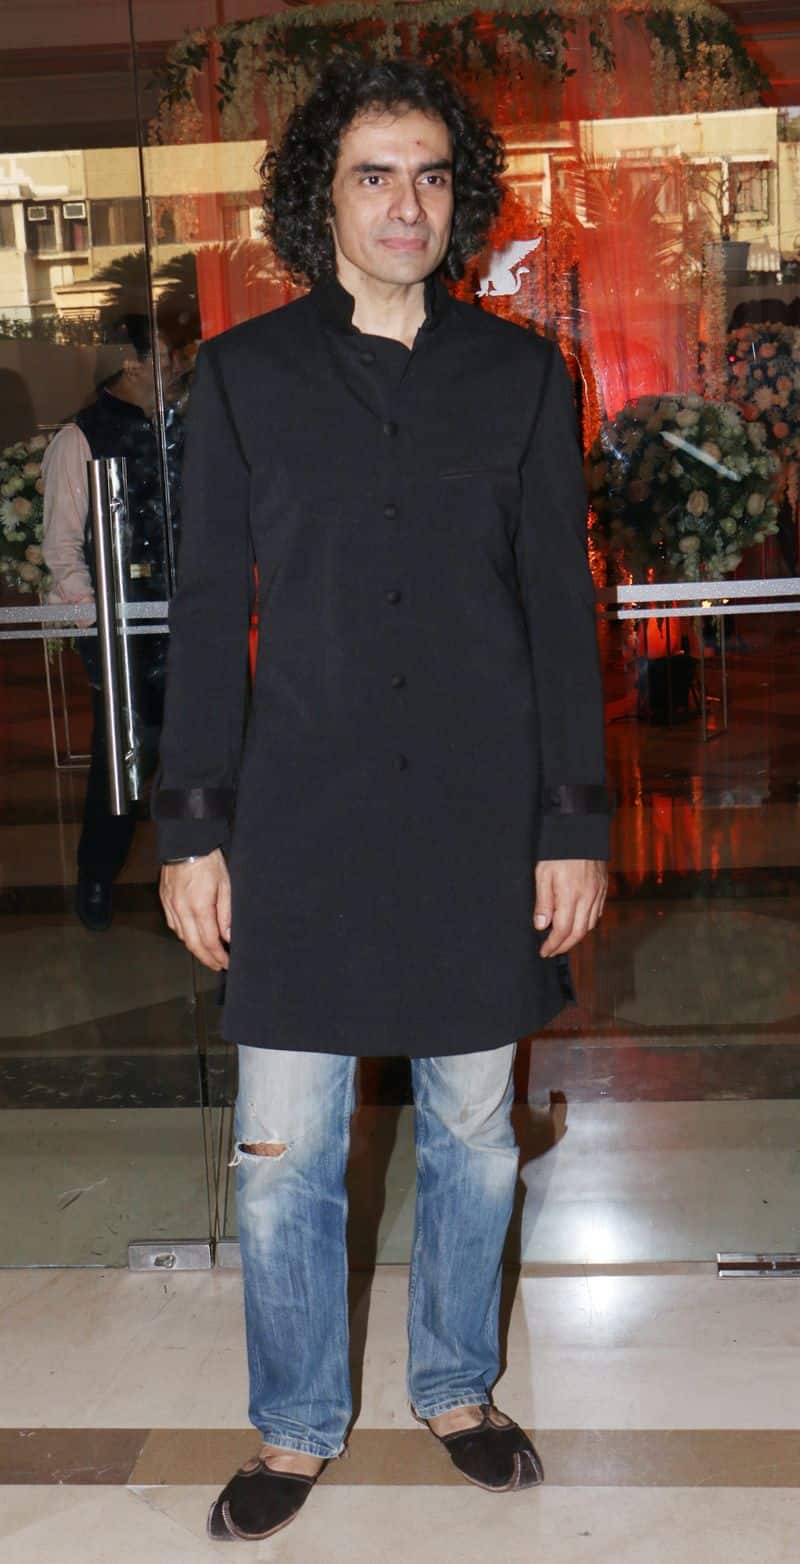 Filmmaker Imtiaz Ali also attended the producer Dinesh Vijan's wedding in his usual casual avatar.